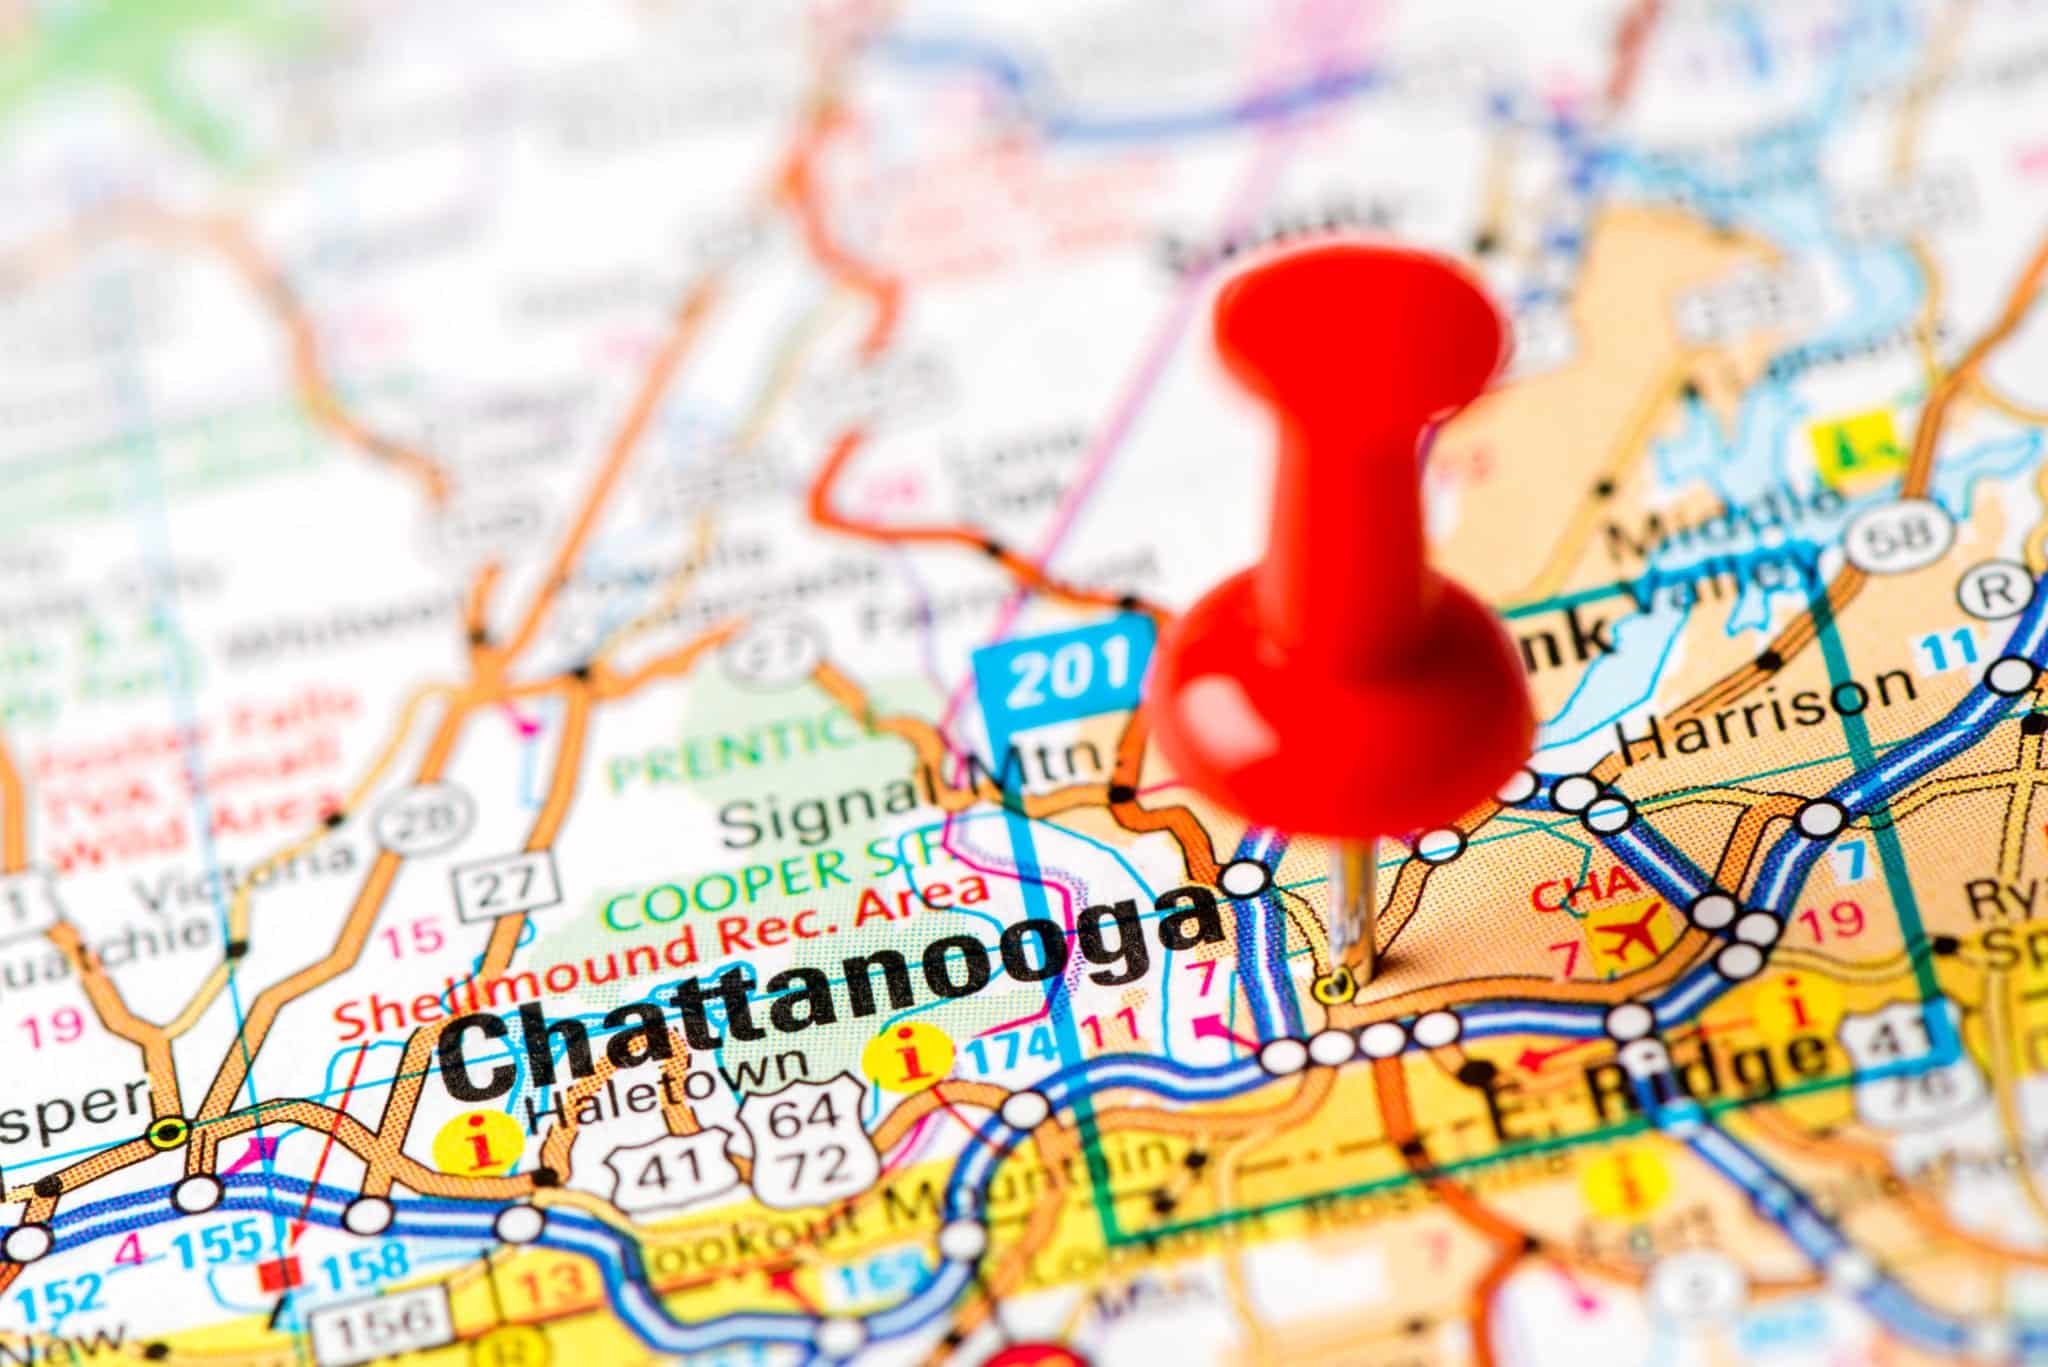 Chattanooga on a map